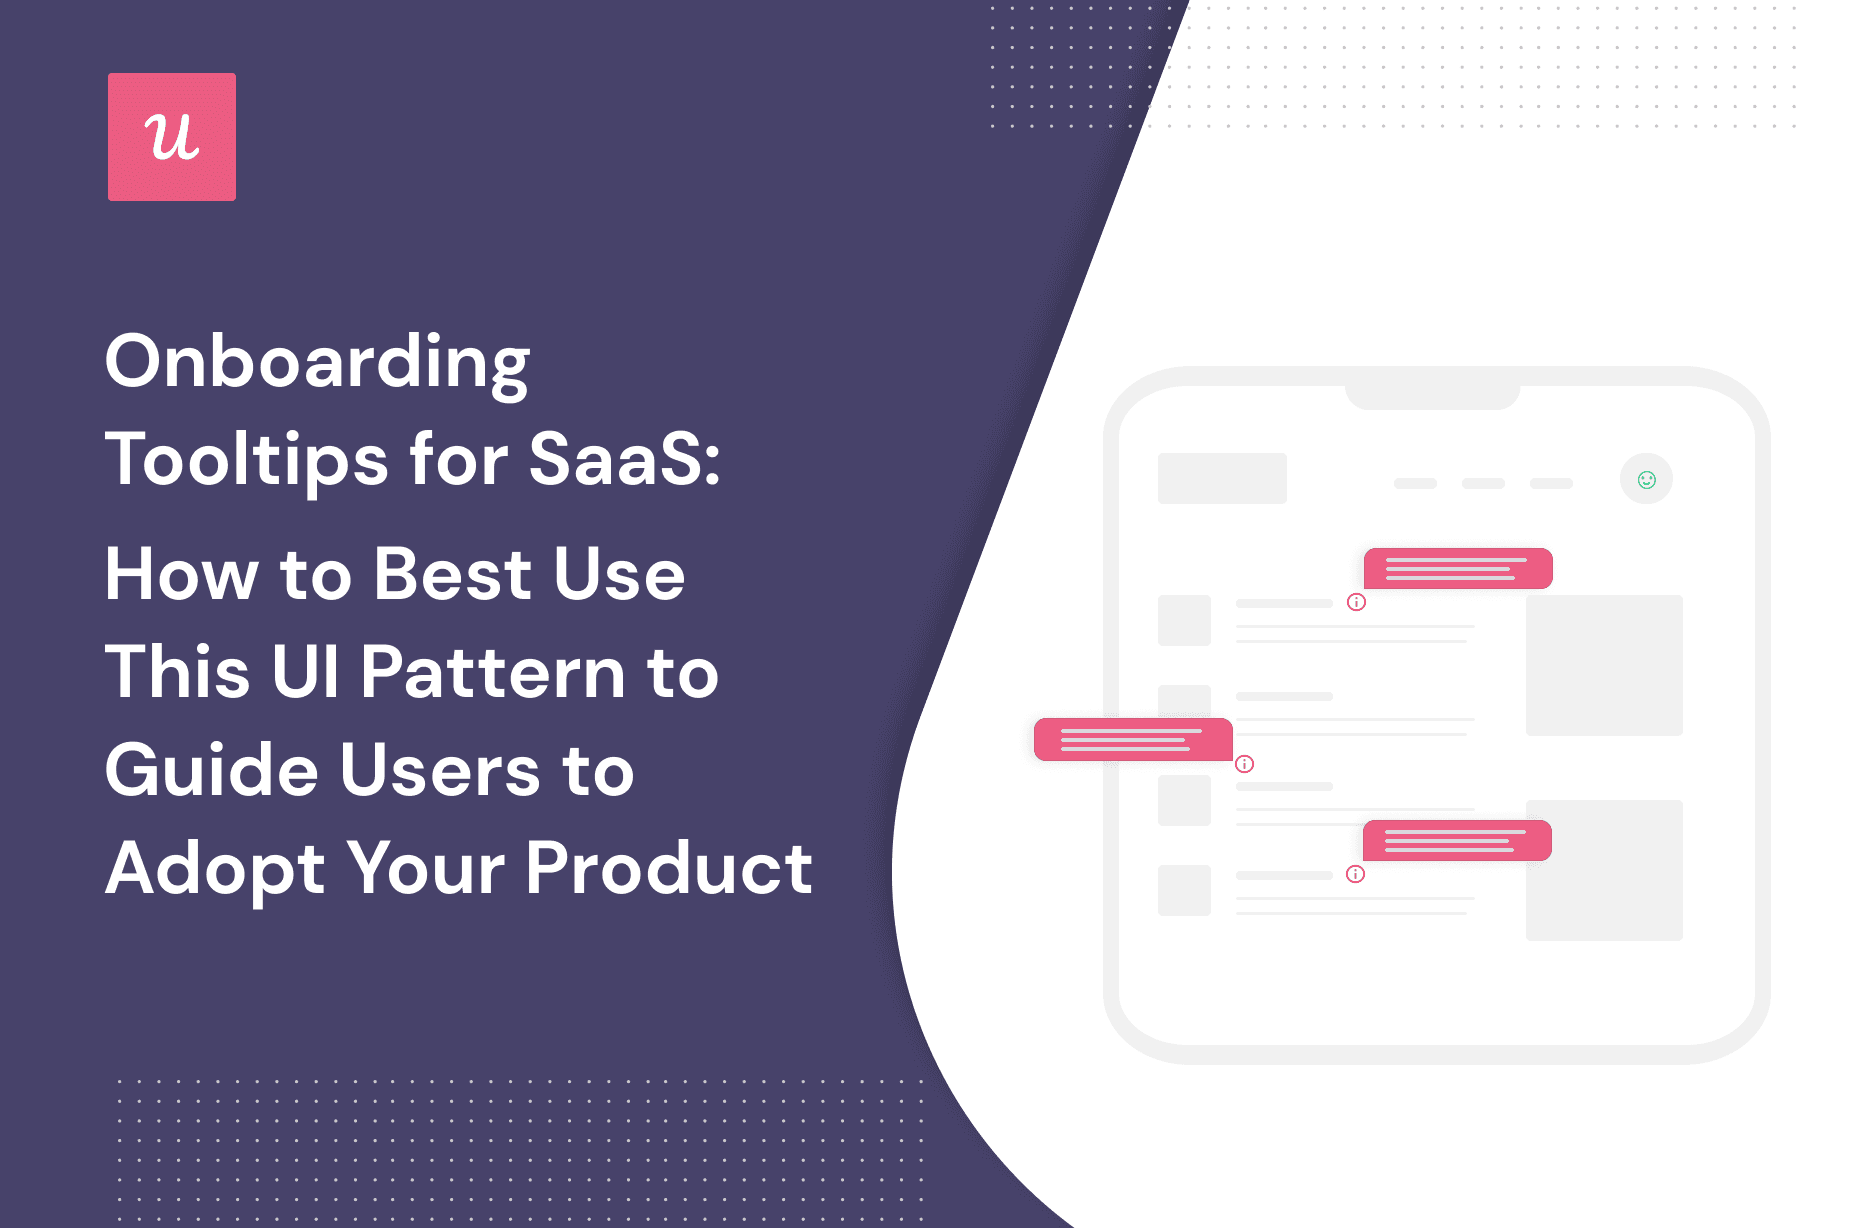 Onboarding Tooltips For SaaS: How to Best Use This UI Pattern to Guide Users to Adopt Your Product